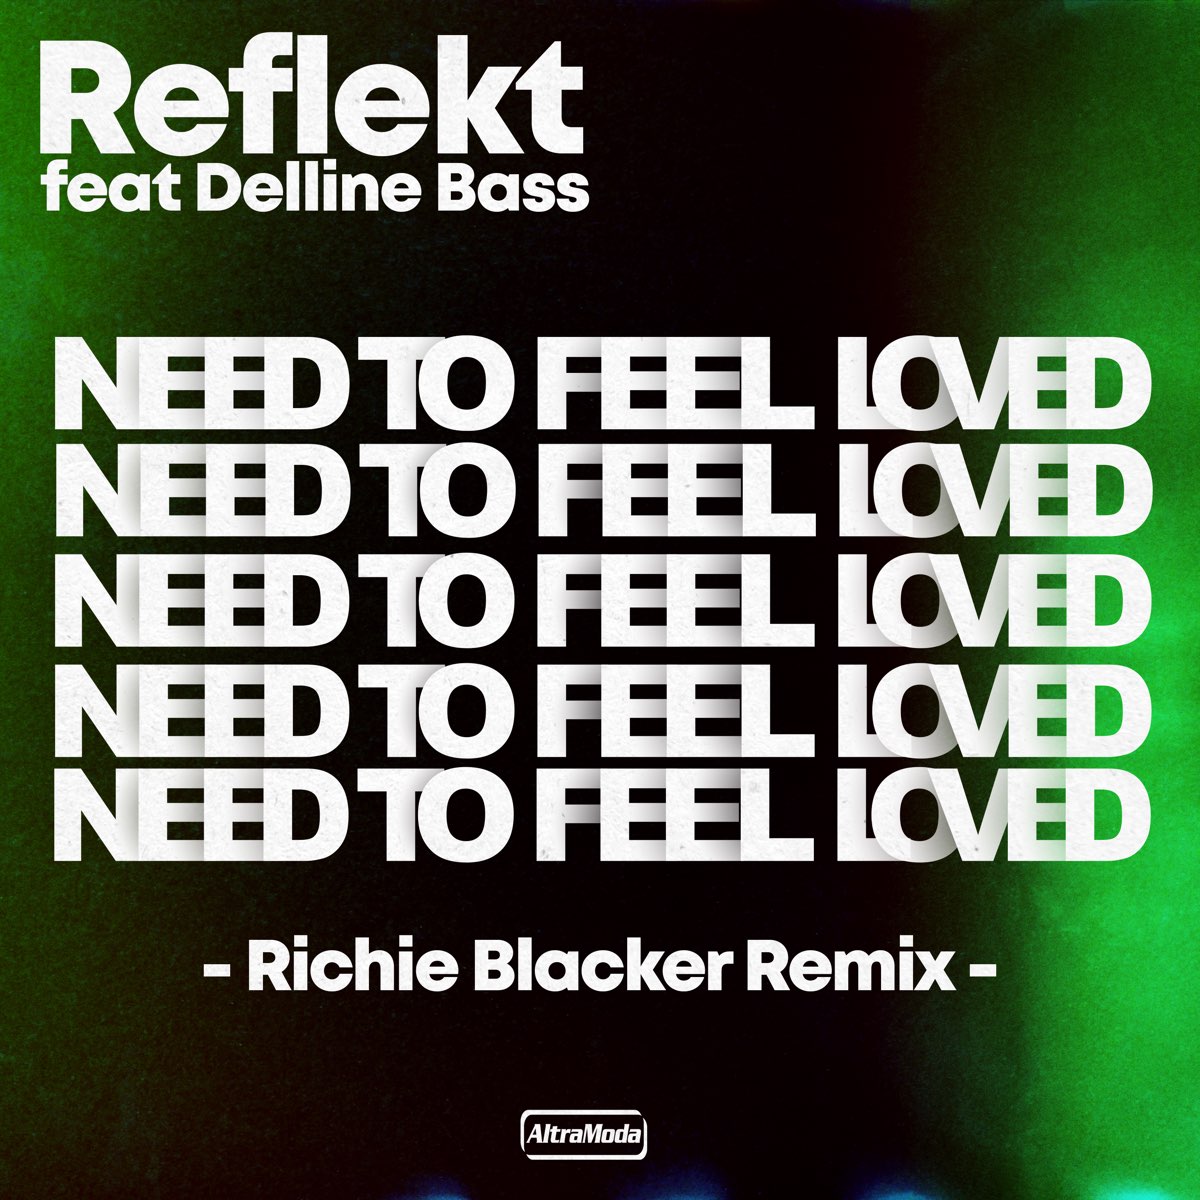 Reflekt delline bass need to feel loved. Reflekt ft. Delline Bass need to feel Loved. Reflekt feat. Delline Bass. Reflekt need to feel Loved. Reflekt feat. Delline Bass - need to feel Loved (Adam k & Soha Vocal Remix).